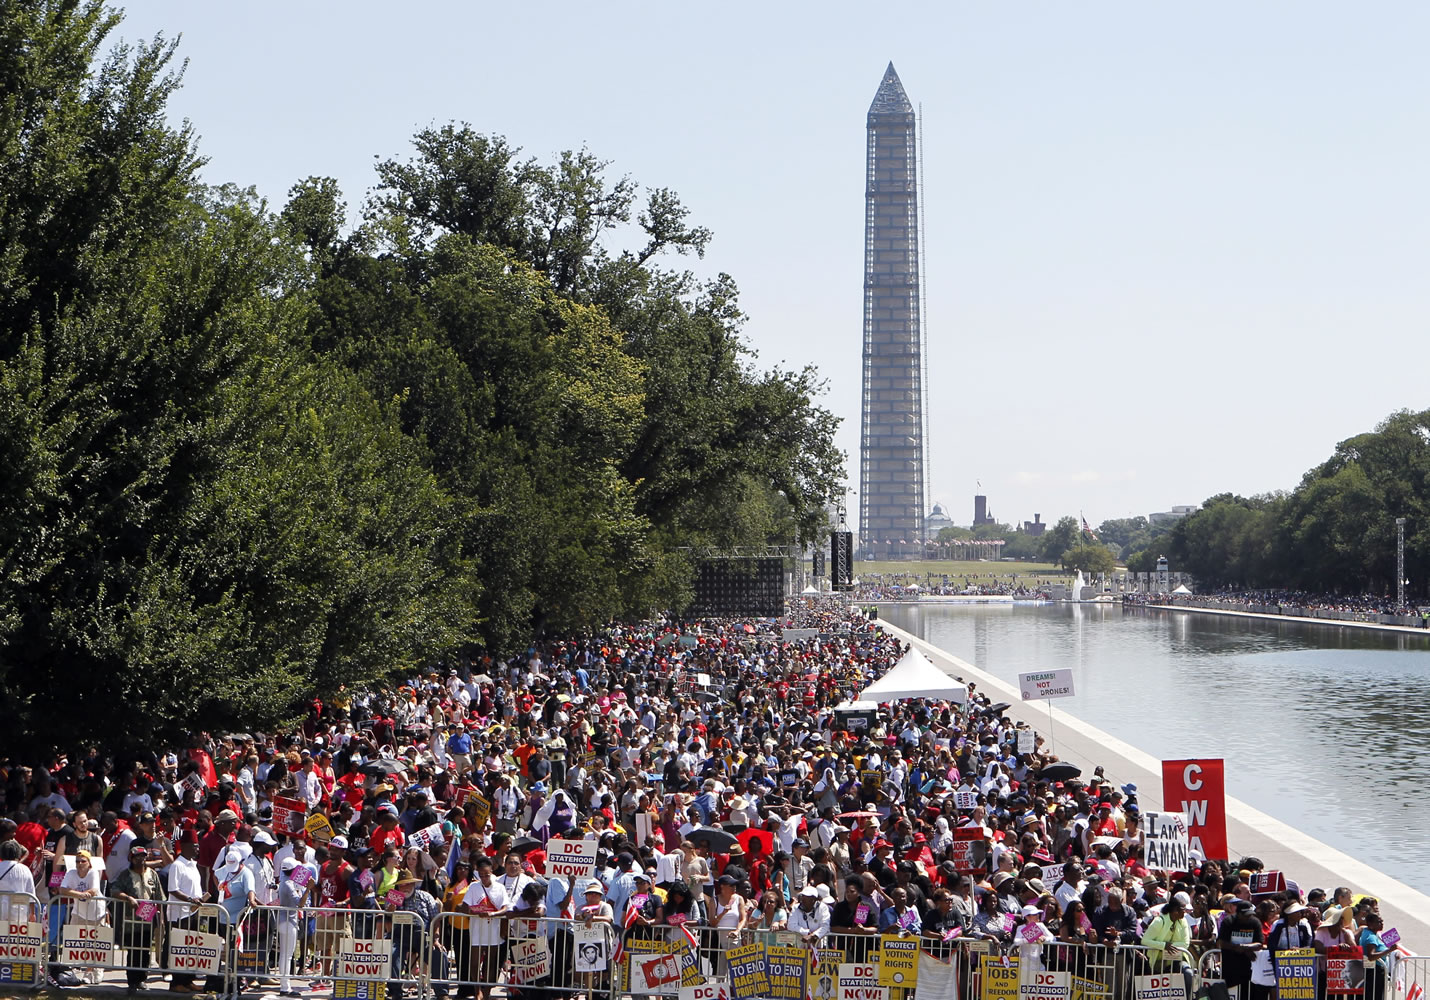 People line the Reflecting Pool during Saturday's rally to commemorate the 50th anniversary of the 1963 March on Washington.